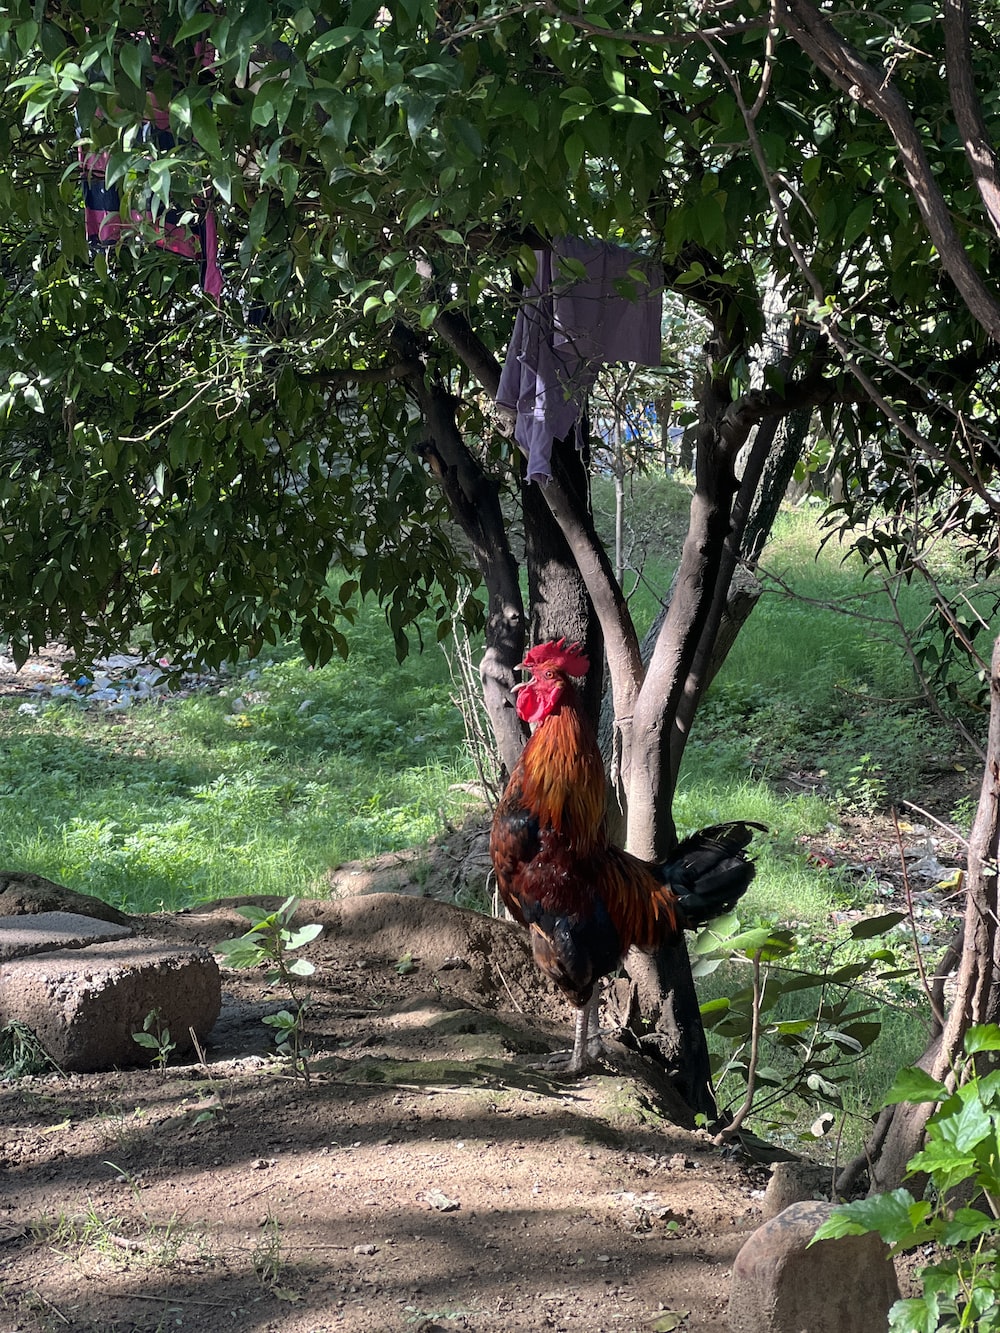 a rooster standing on dirt near trees